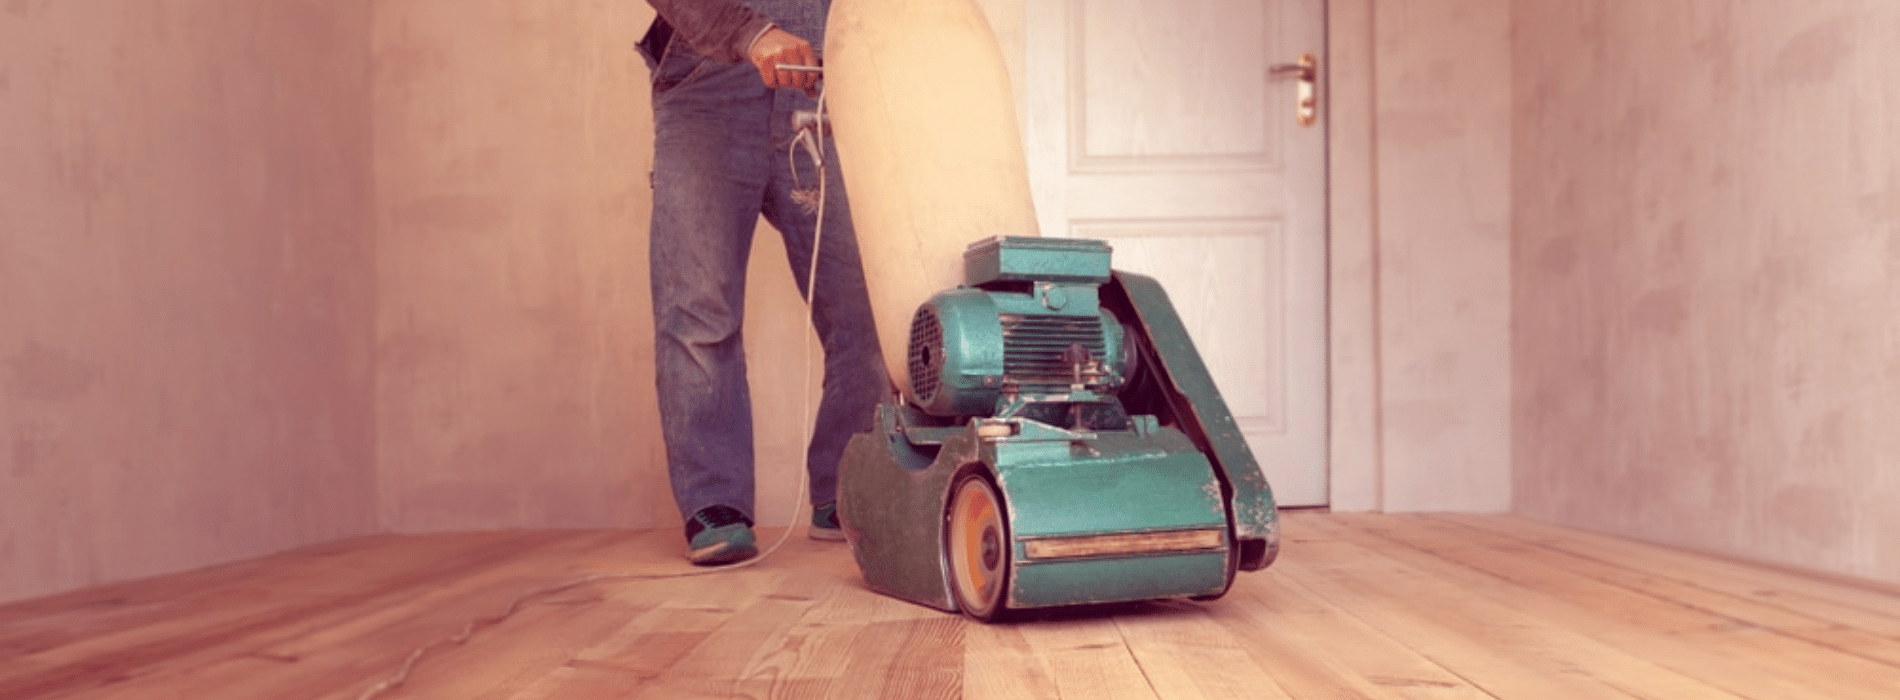 In Rush Green, RM7, Mr Sander® are using a Bona Belt sander (2.2 kW, 230V) to sand a parquet floor. The sander is connected to a dust extraction system with a HEPA filter (50 Hz/60 Hz) for a clean and efficient result.